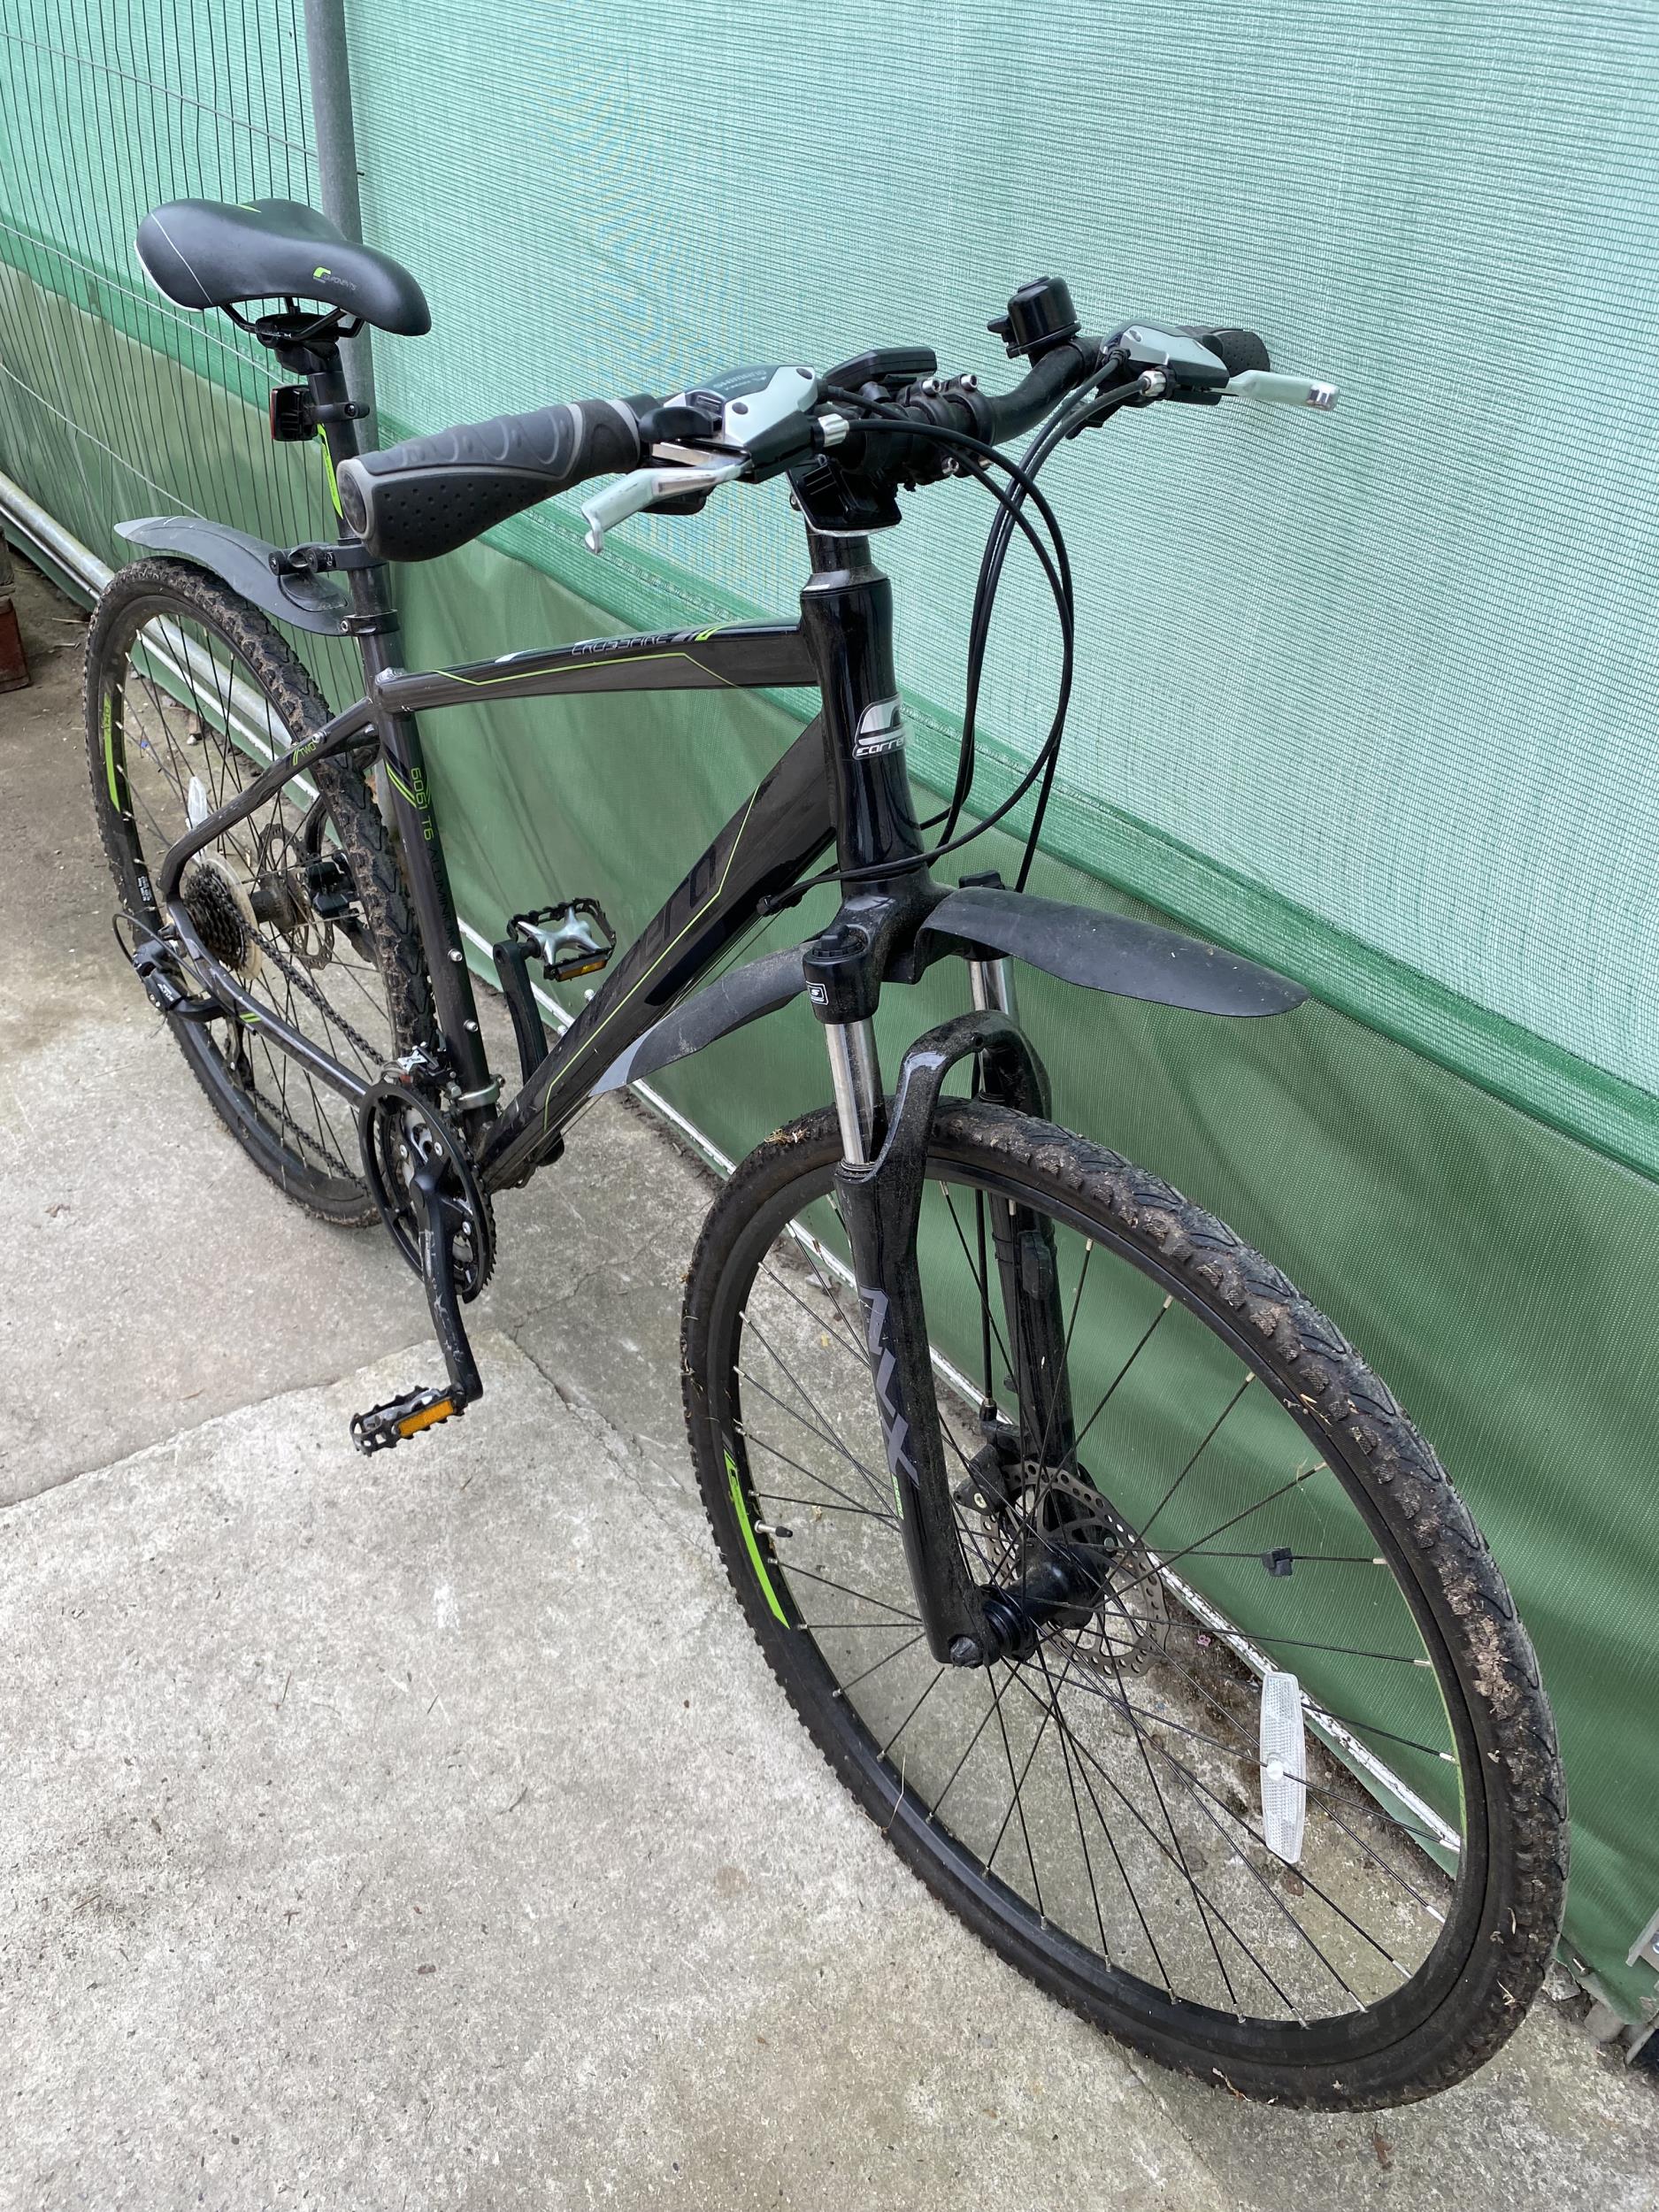 A CARRERA CROSSFIRE GENTS MOUNTAIN BIKE WITH FRONT SUSPENSION, DISC BRAKES AND 21 SPEED SHIMANO GEAR - Image 3 of 3